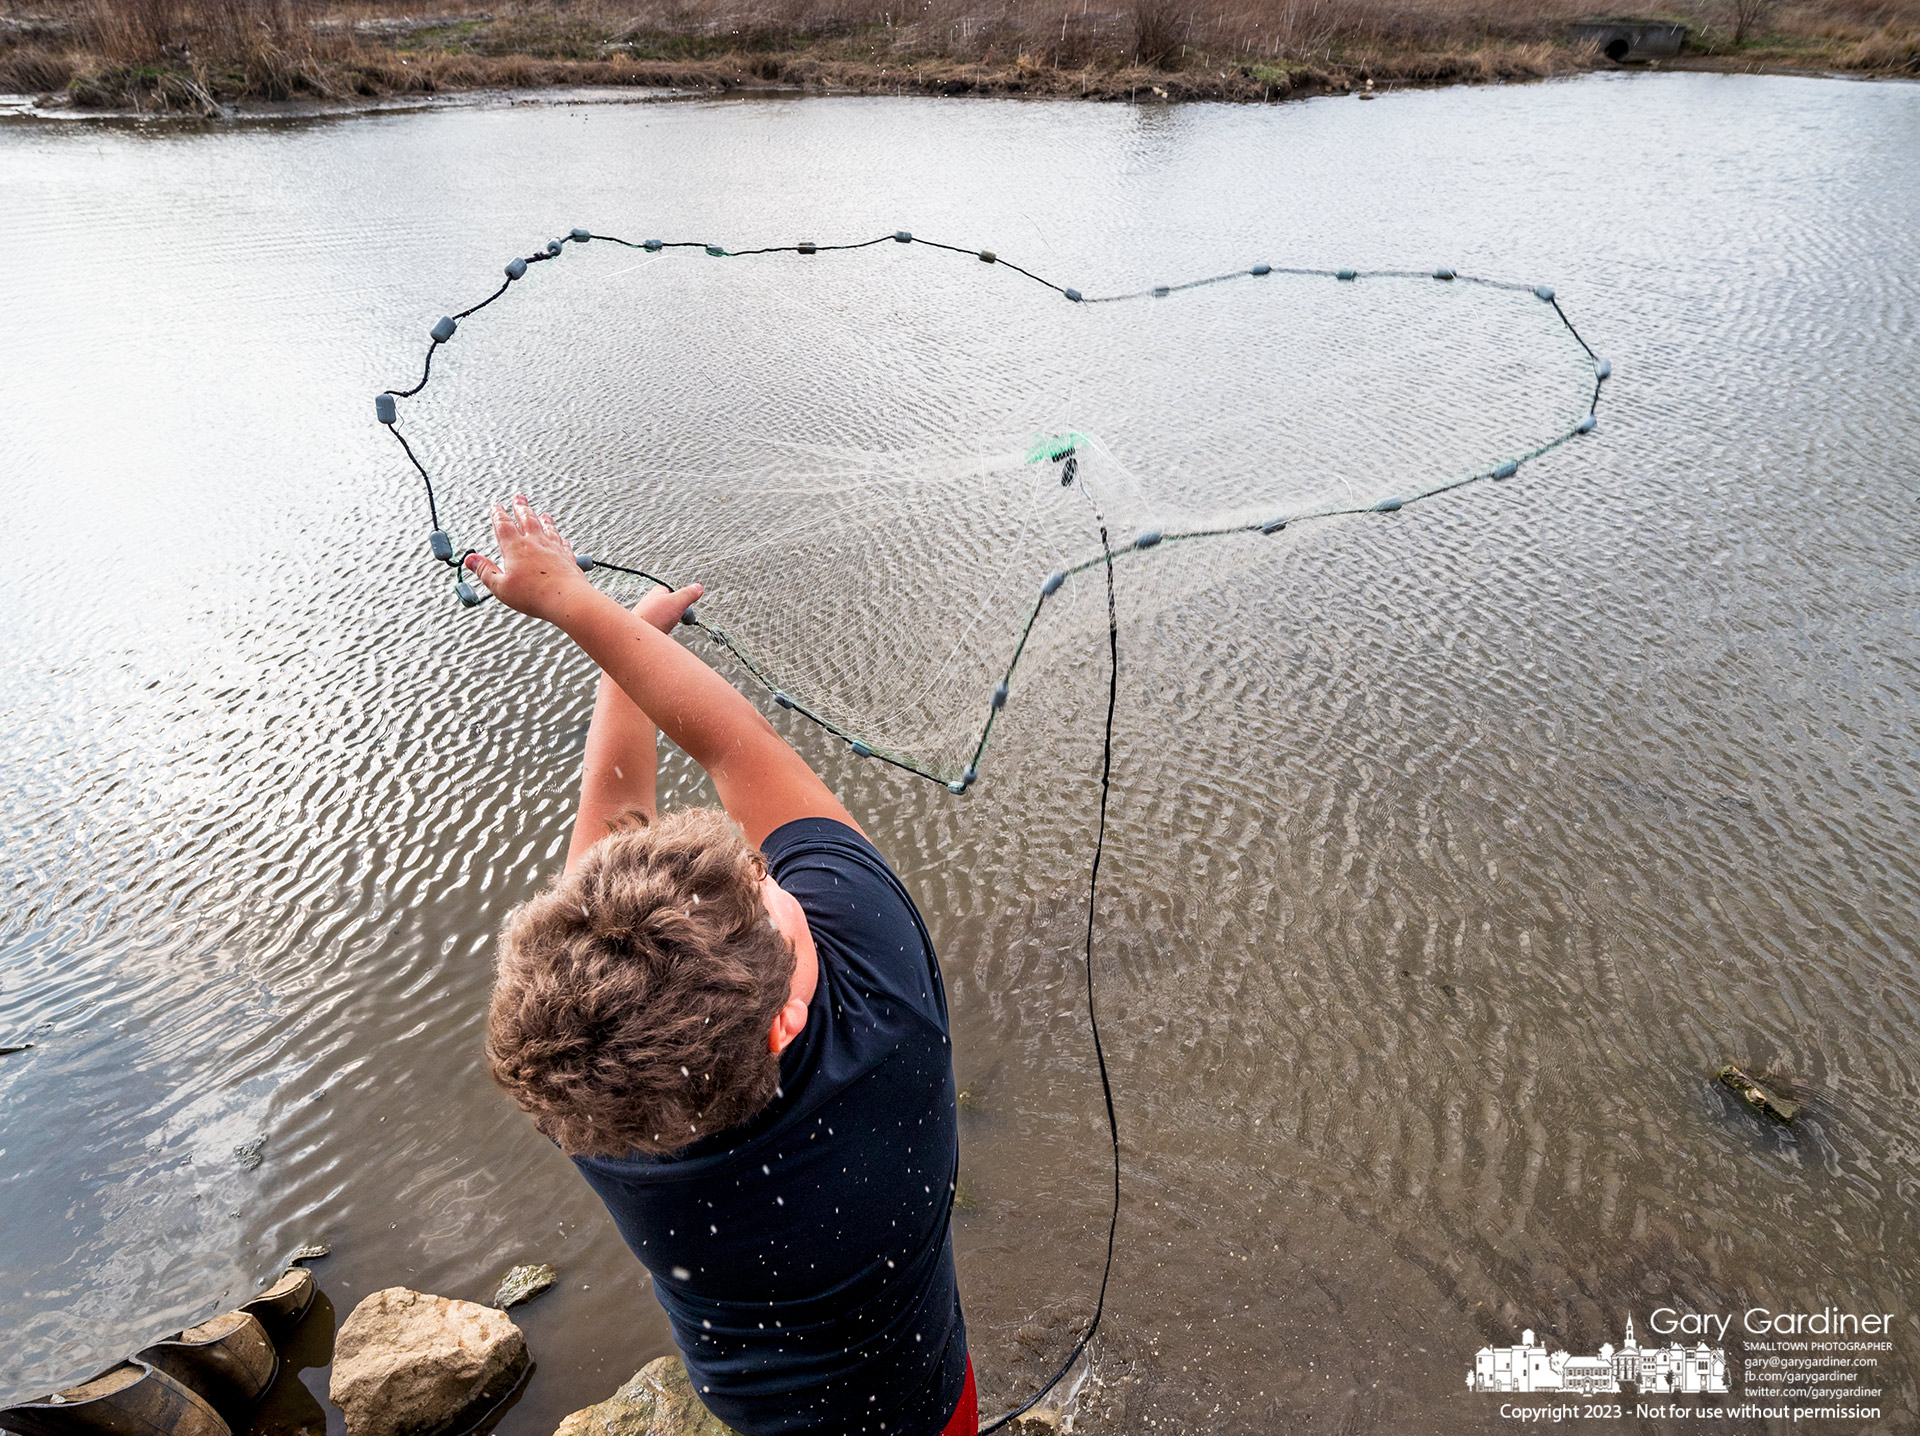 A young fisherman casts his net in the shallow waters of the wetlands at Highlands in search of bait fish for a later trip for a larger catch. My Final Photo for April 4, 2023.